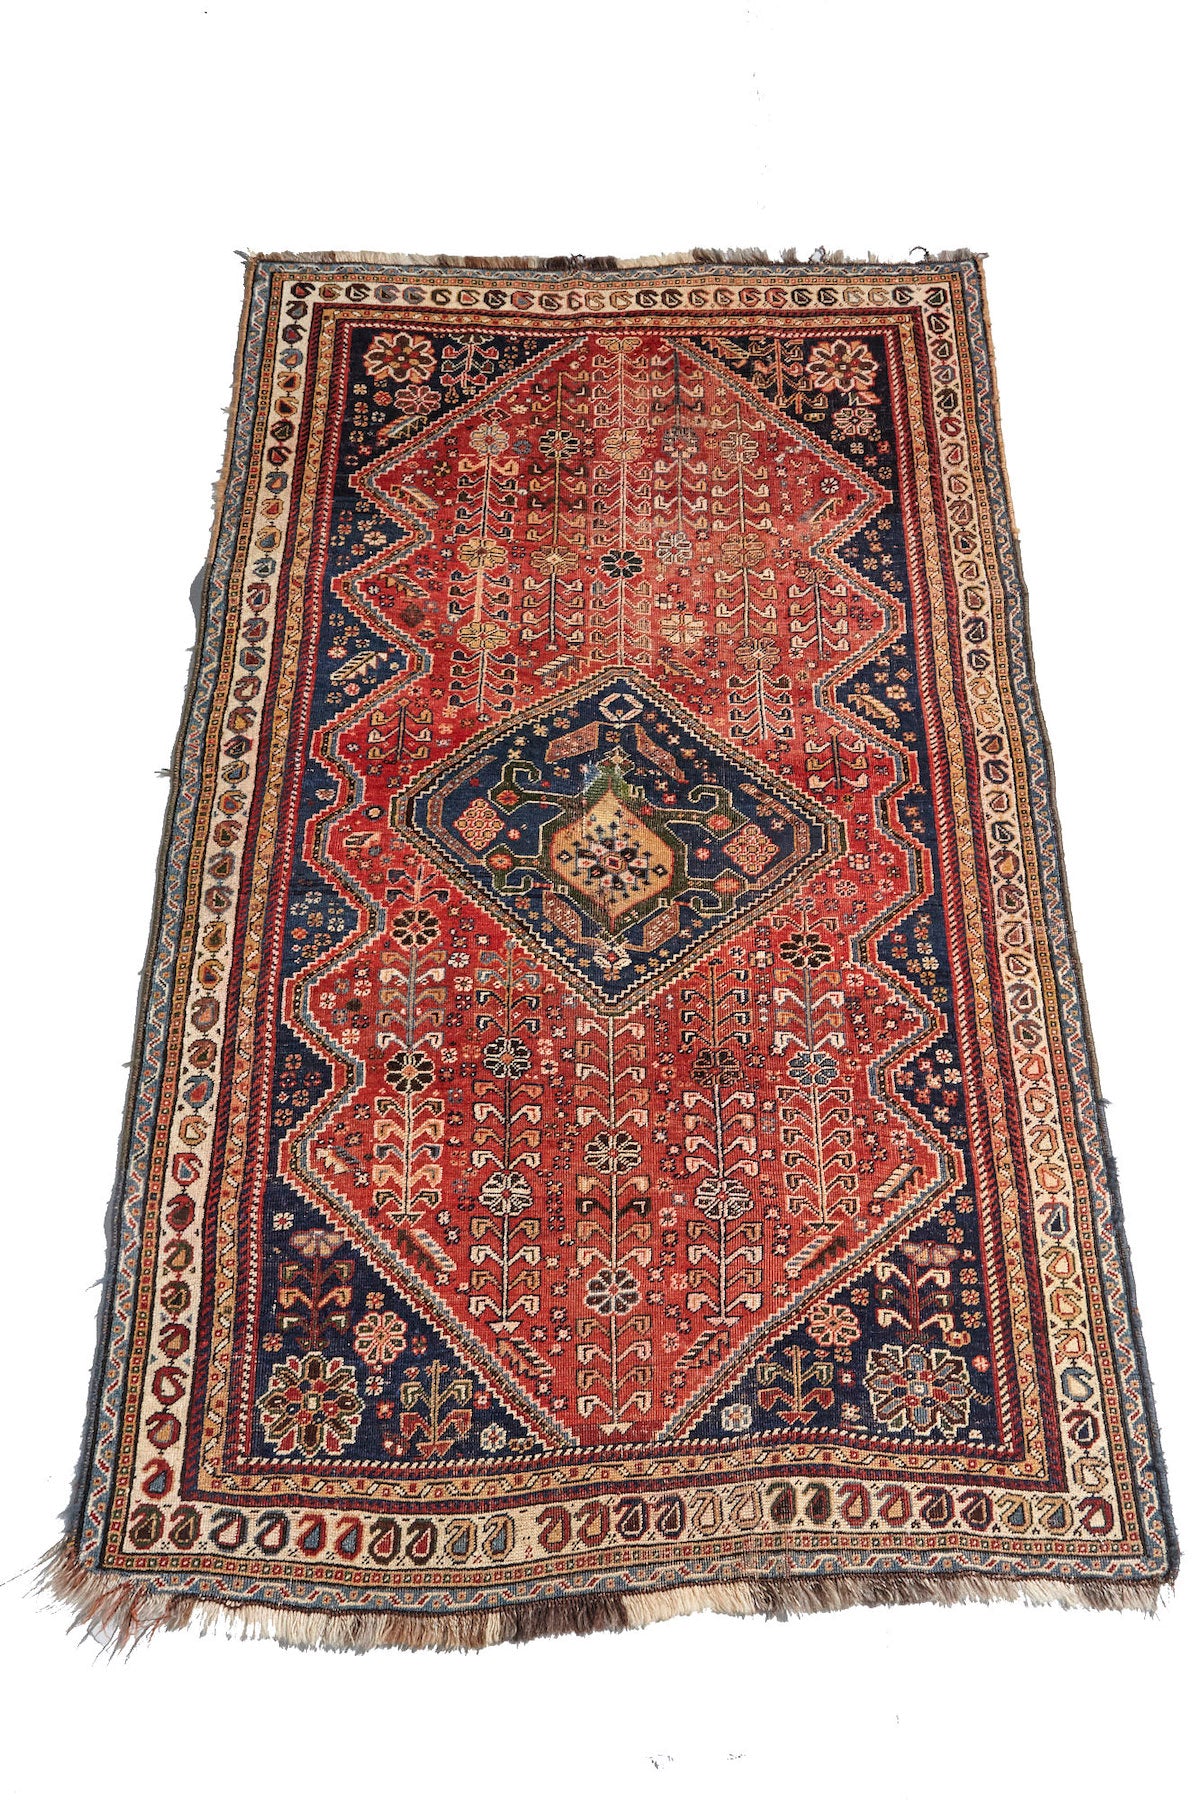 Kashkai antique Persian rug with red base, cream border and deep blue details. Plants and flowers woven throughout. Perfect for a bedroom or study.Available from King Kennedy Rugs Los Angeles